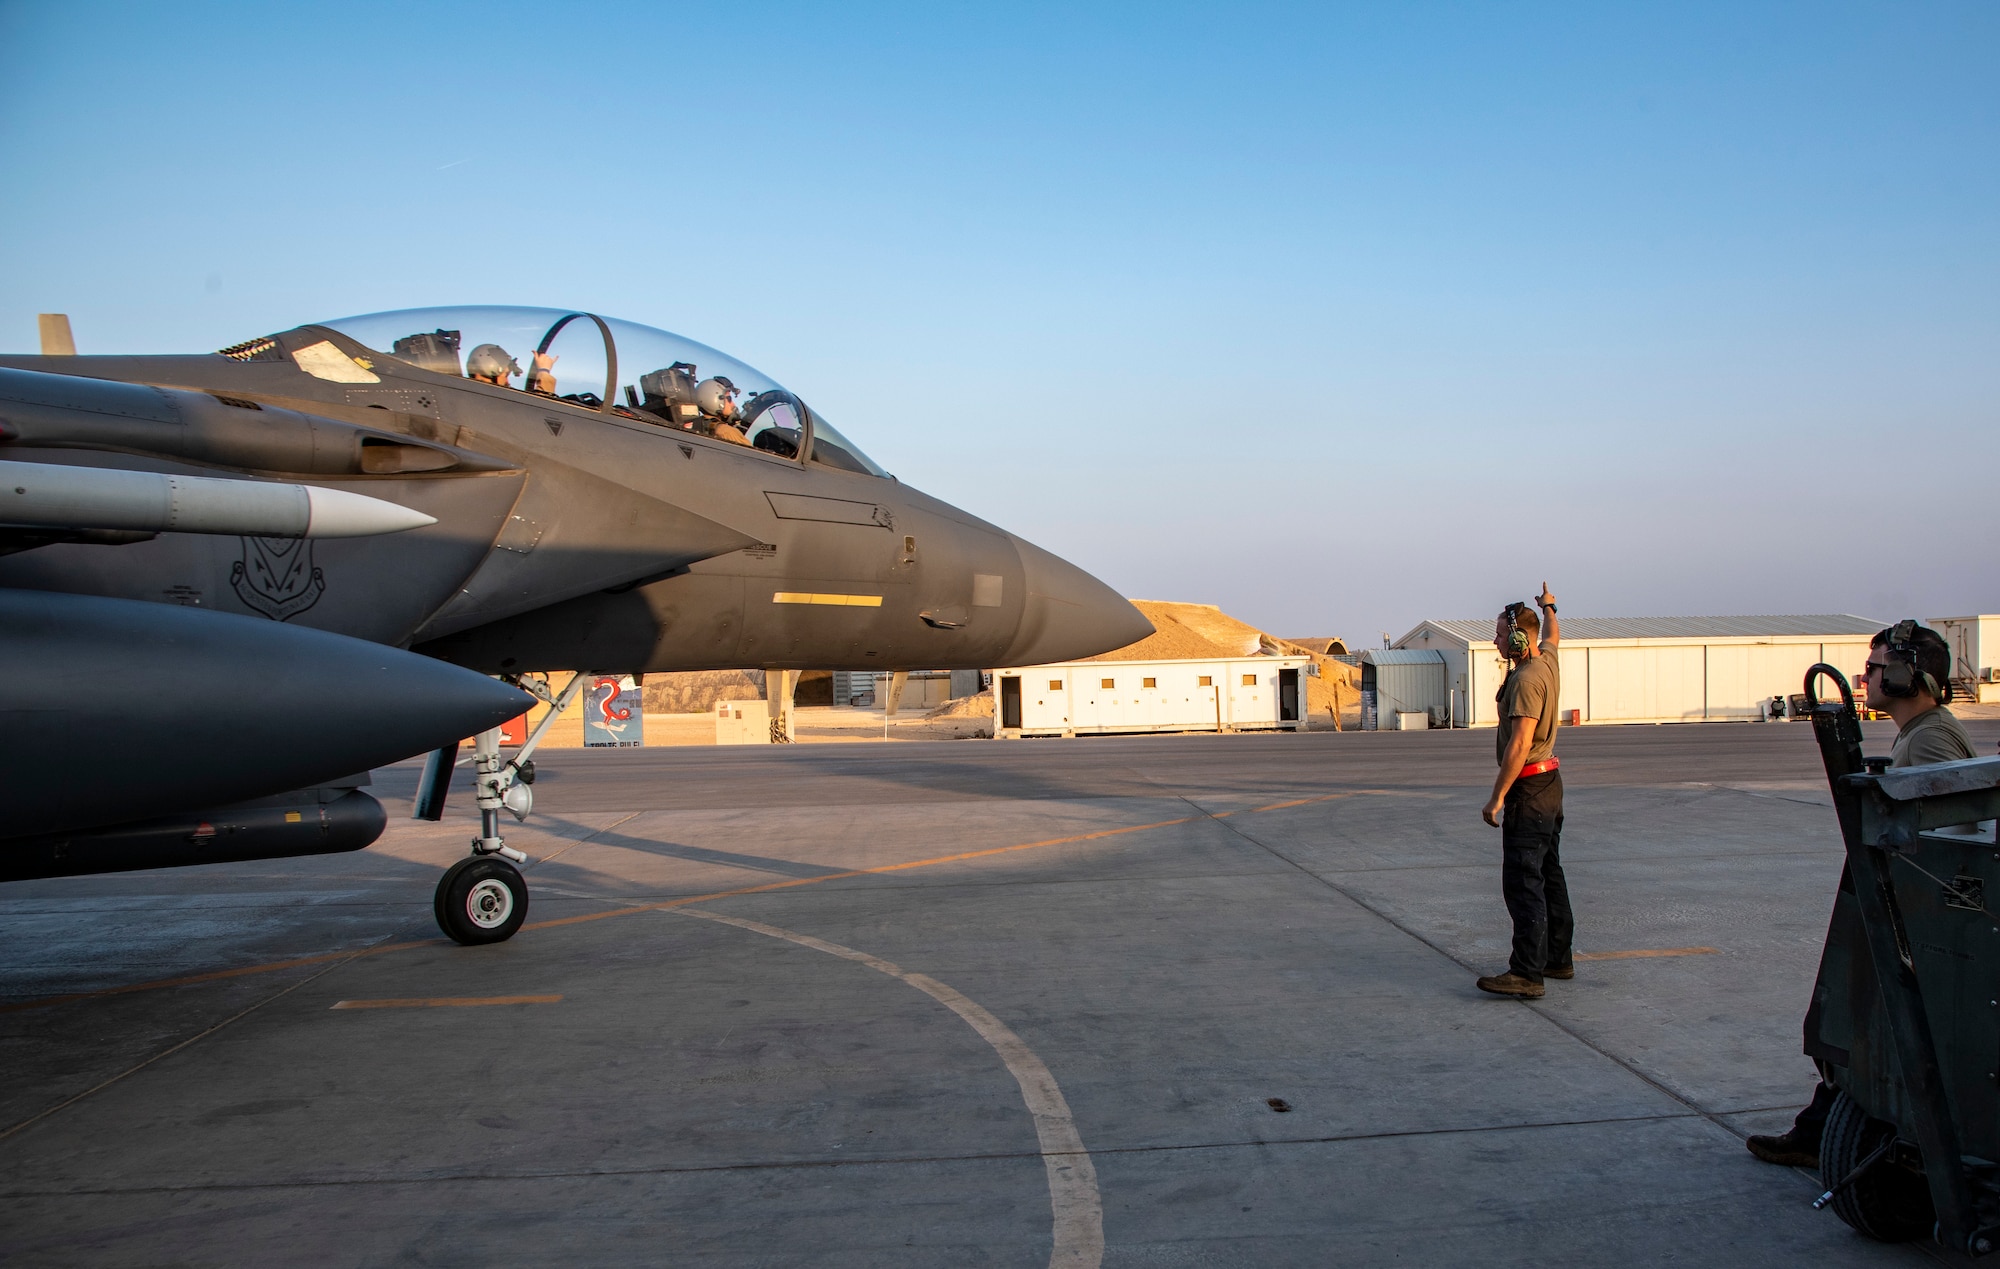 Airman 1st Class Leyton Wheeler, 332d Expeditionary Fighter Generation Squadron crew chief, taxis an F-15E Strike Eagle at an undisclosed location, Southwest Asia, Nov. 15, 2022. Capt. Benjamin Jones, pilot, and 1st Lt. Jacob Ferrer, systems operator, 389th Fighter Squadron, are on board ready to fly. He and Airman 1st Class William Phillips (right) were there to conduct a preflight inspection, ensuring that all systems are working properly, reducing the risk of in-flight emergencies. (U.S. Air Force photo by: Tech. Sgt. Jim Bentley)